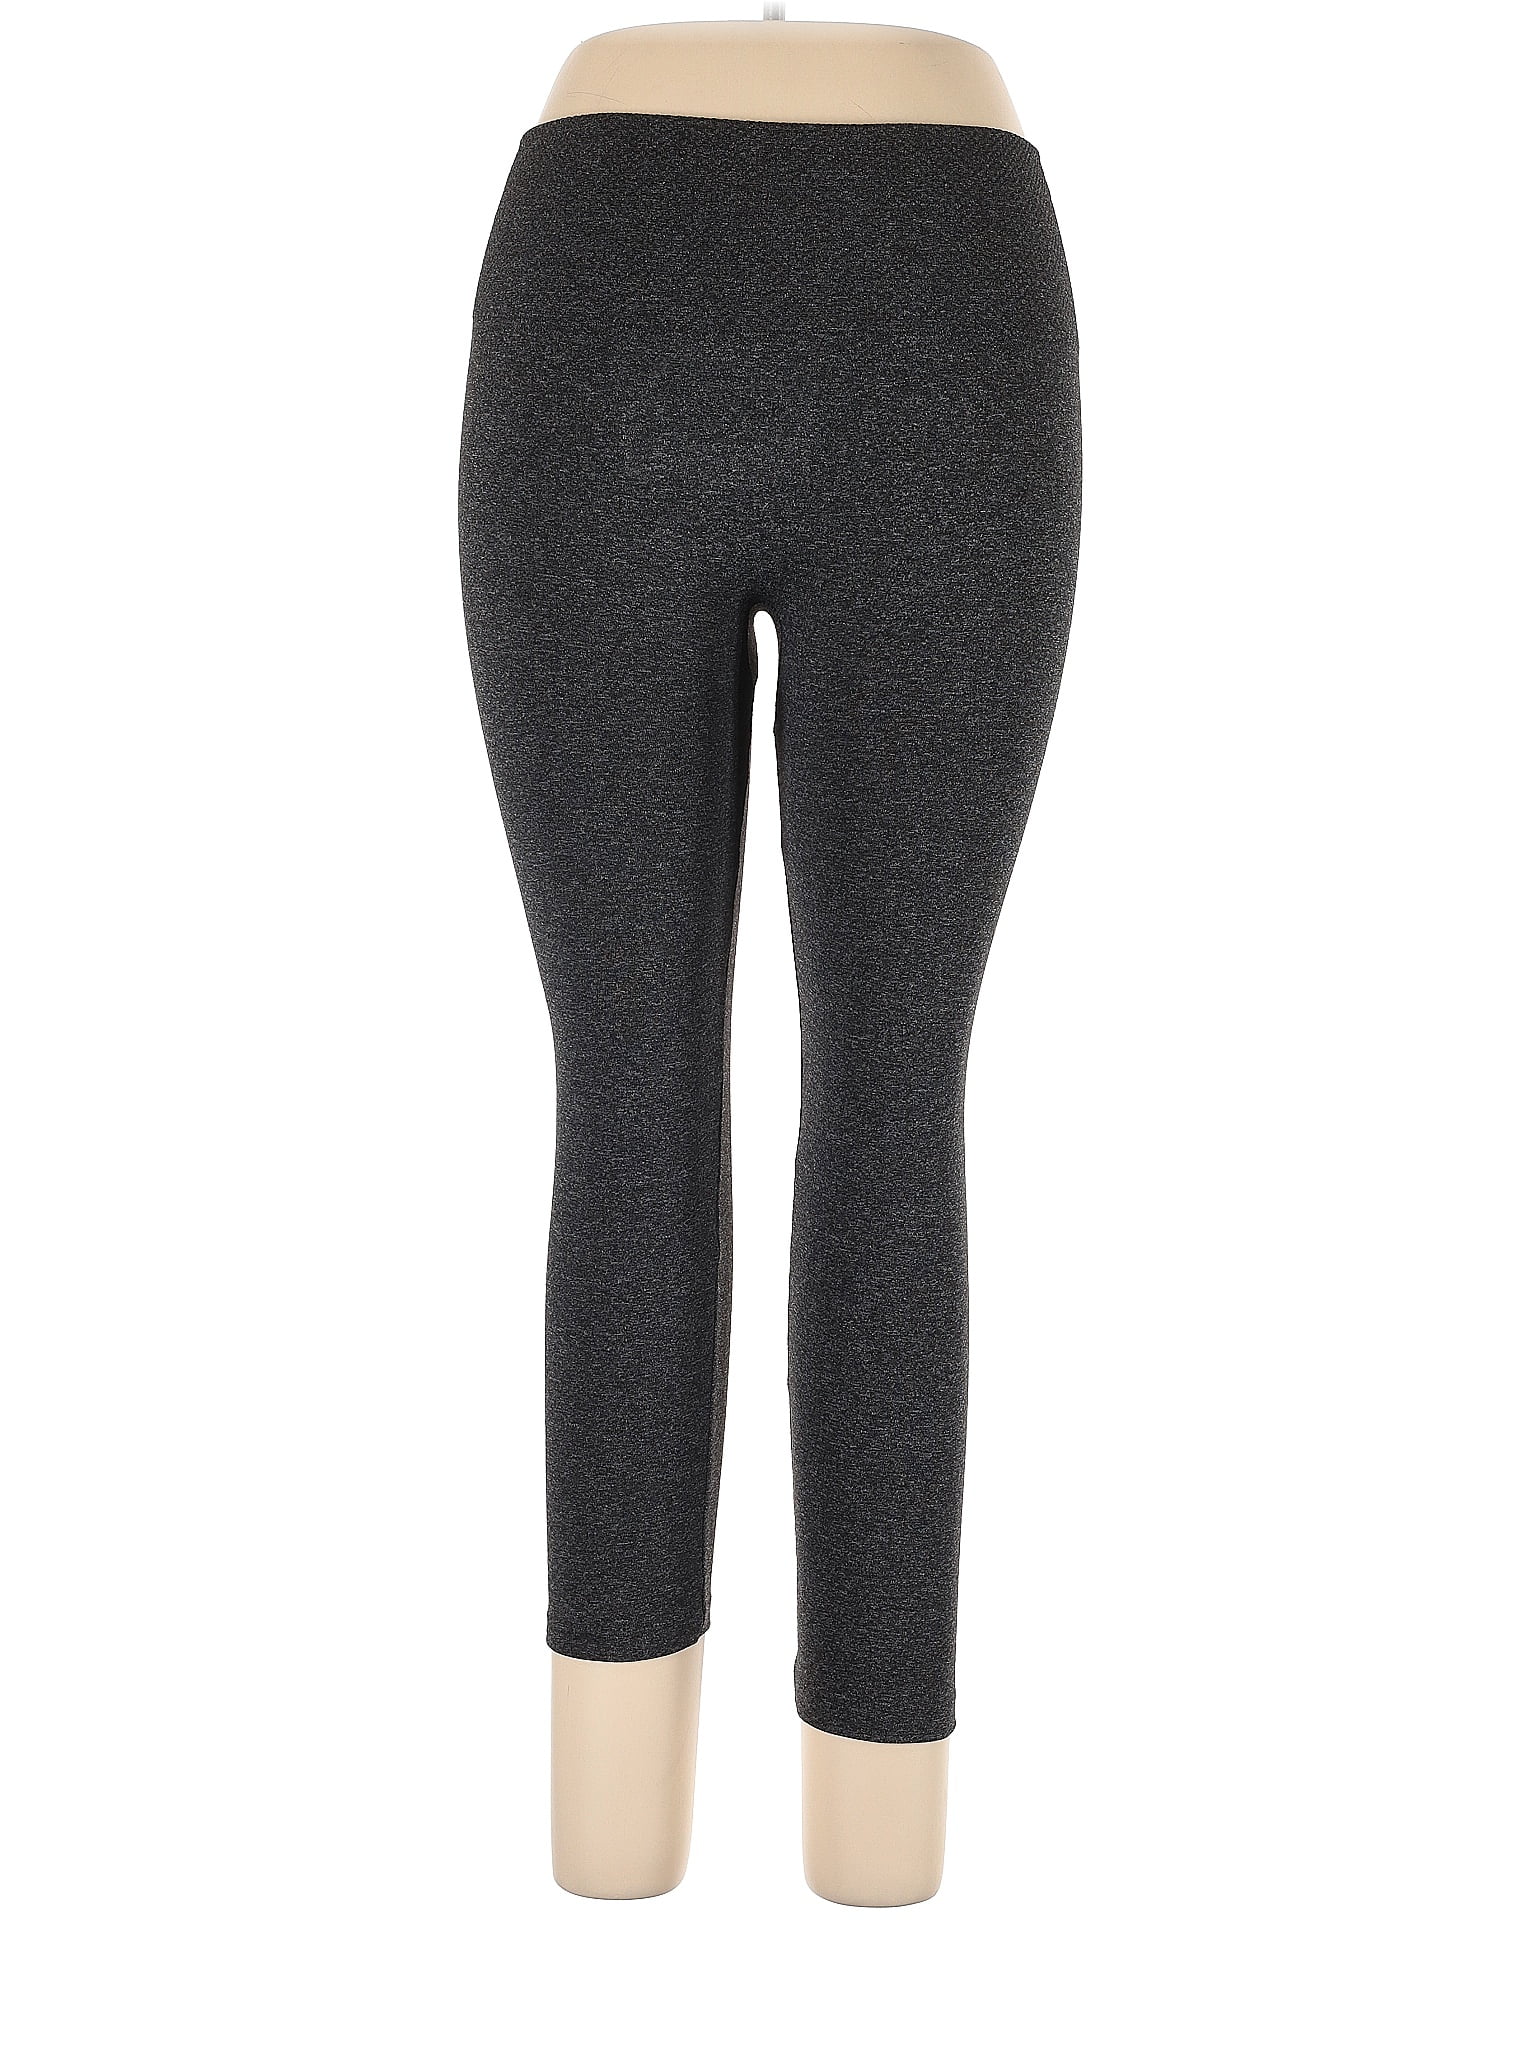 French Laundry Women's Leggings On Sale Up To 90% Off Retail